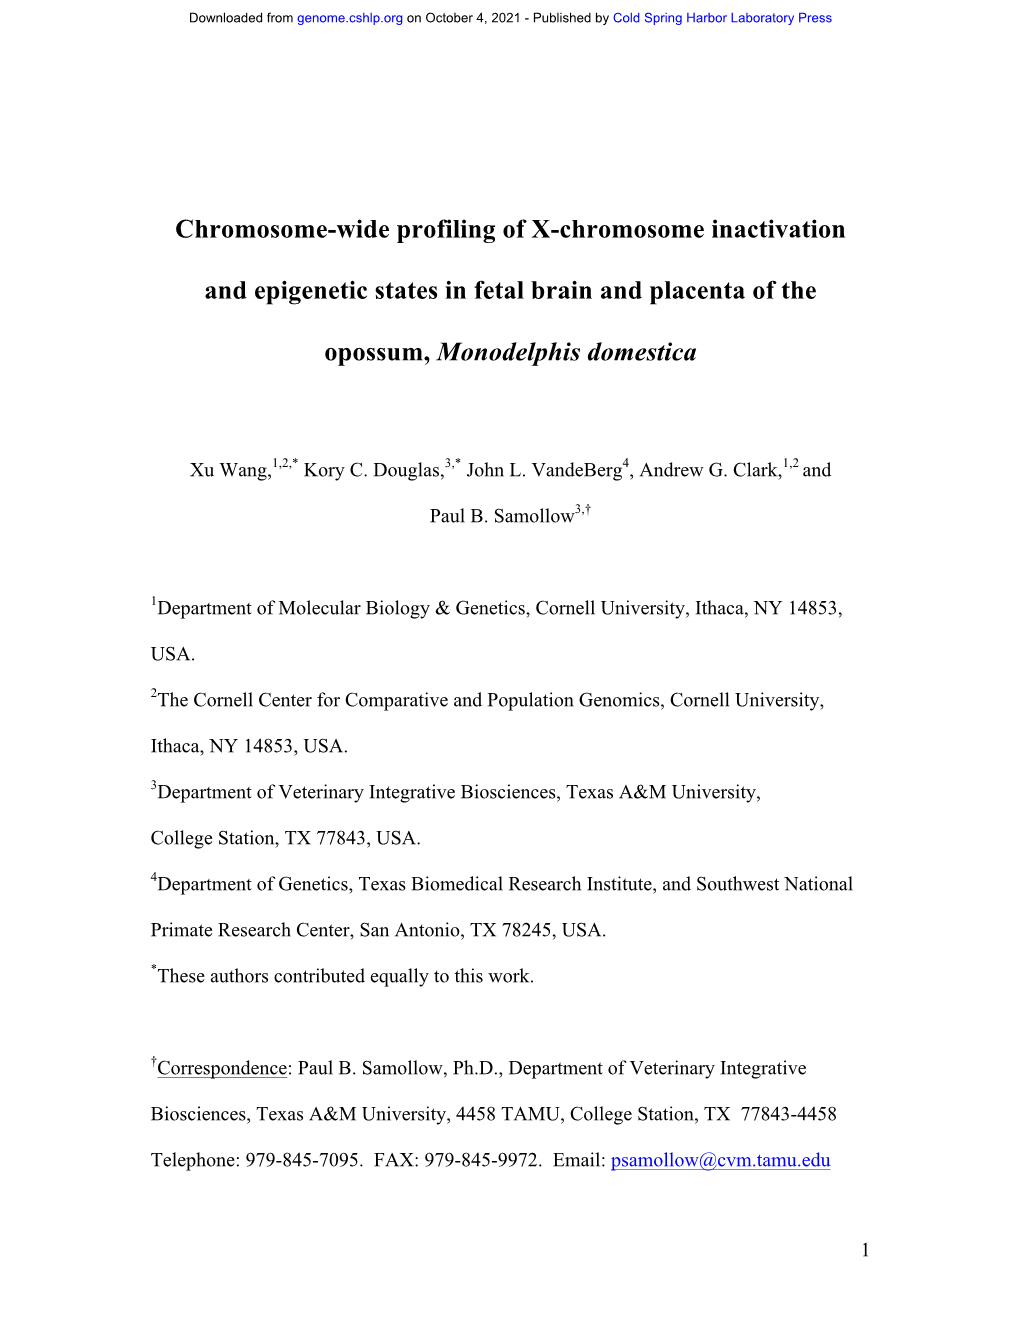 Chromosome-Wide Profiling of X-Chromosome Inactivation and Epigenetic States in Fetal Brain and Placenta of the Opossum, Monodelphis Domestica